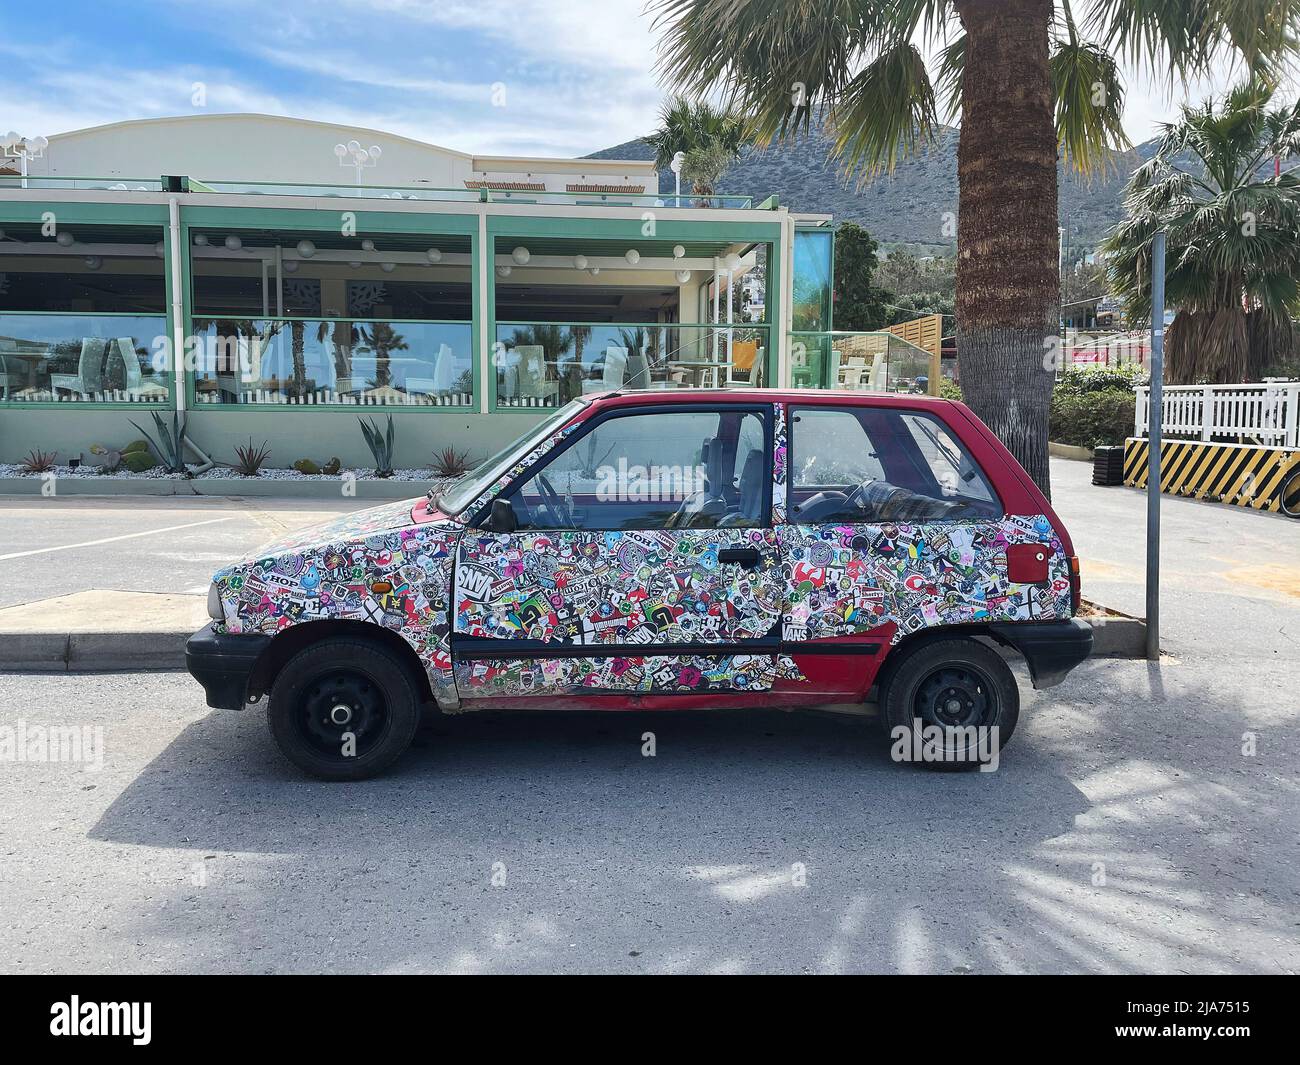 Greece, Heraklion. May 12, 2022: Red car full of stickers on the street. Stock Photo